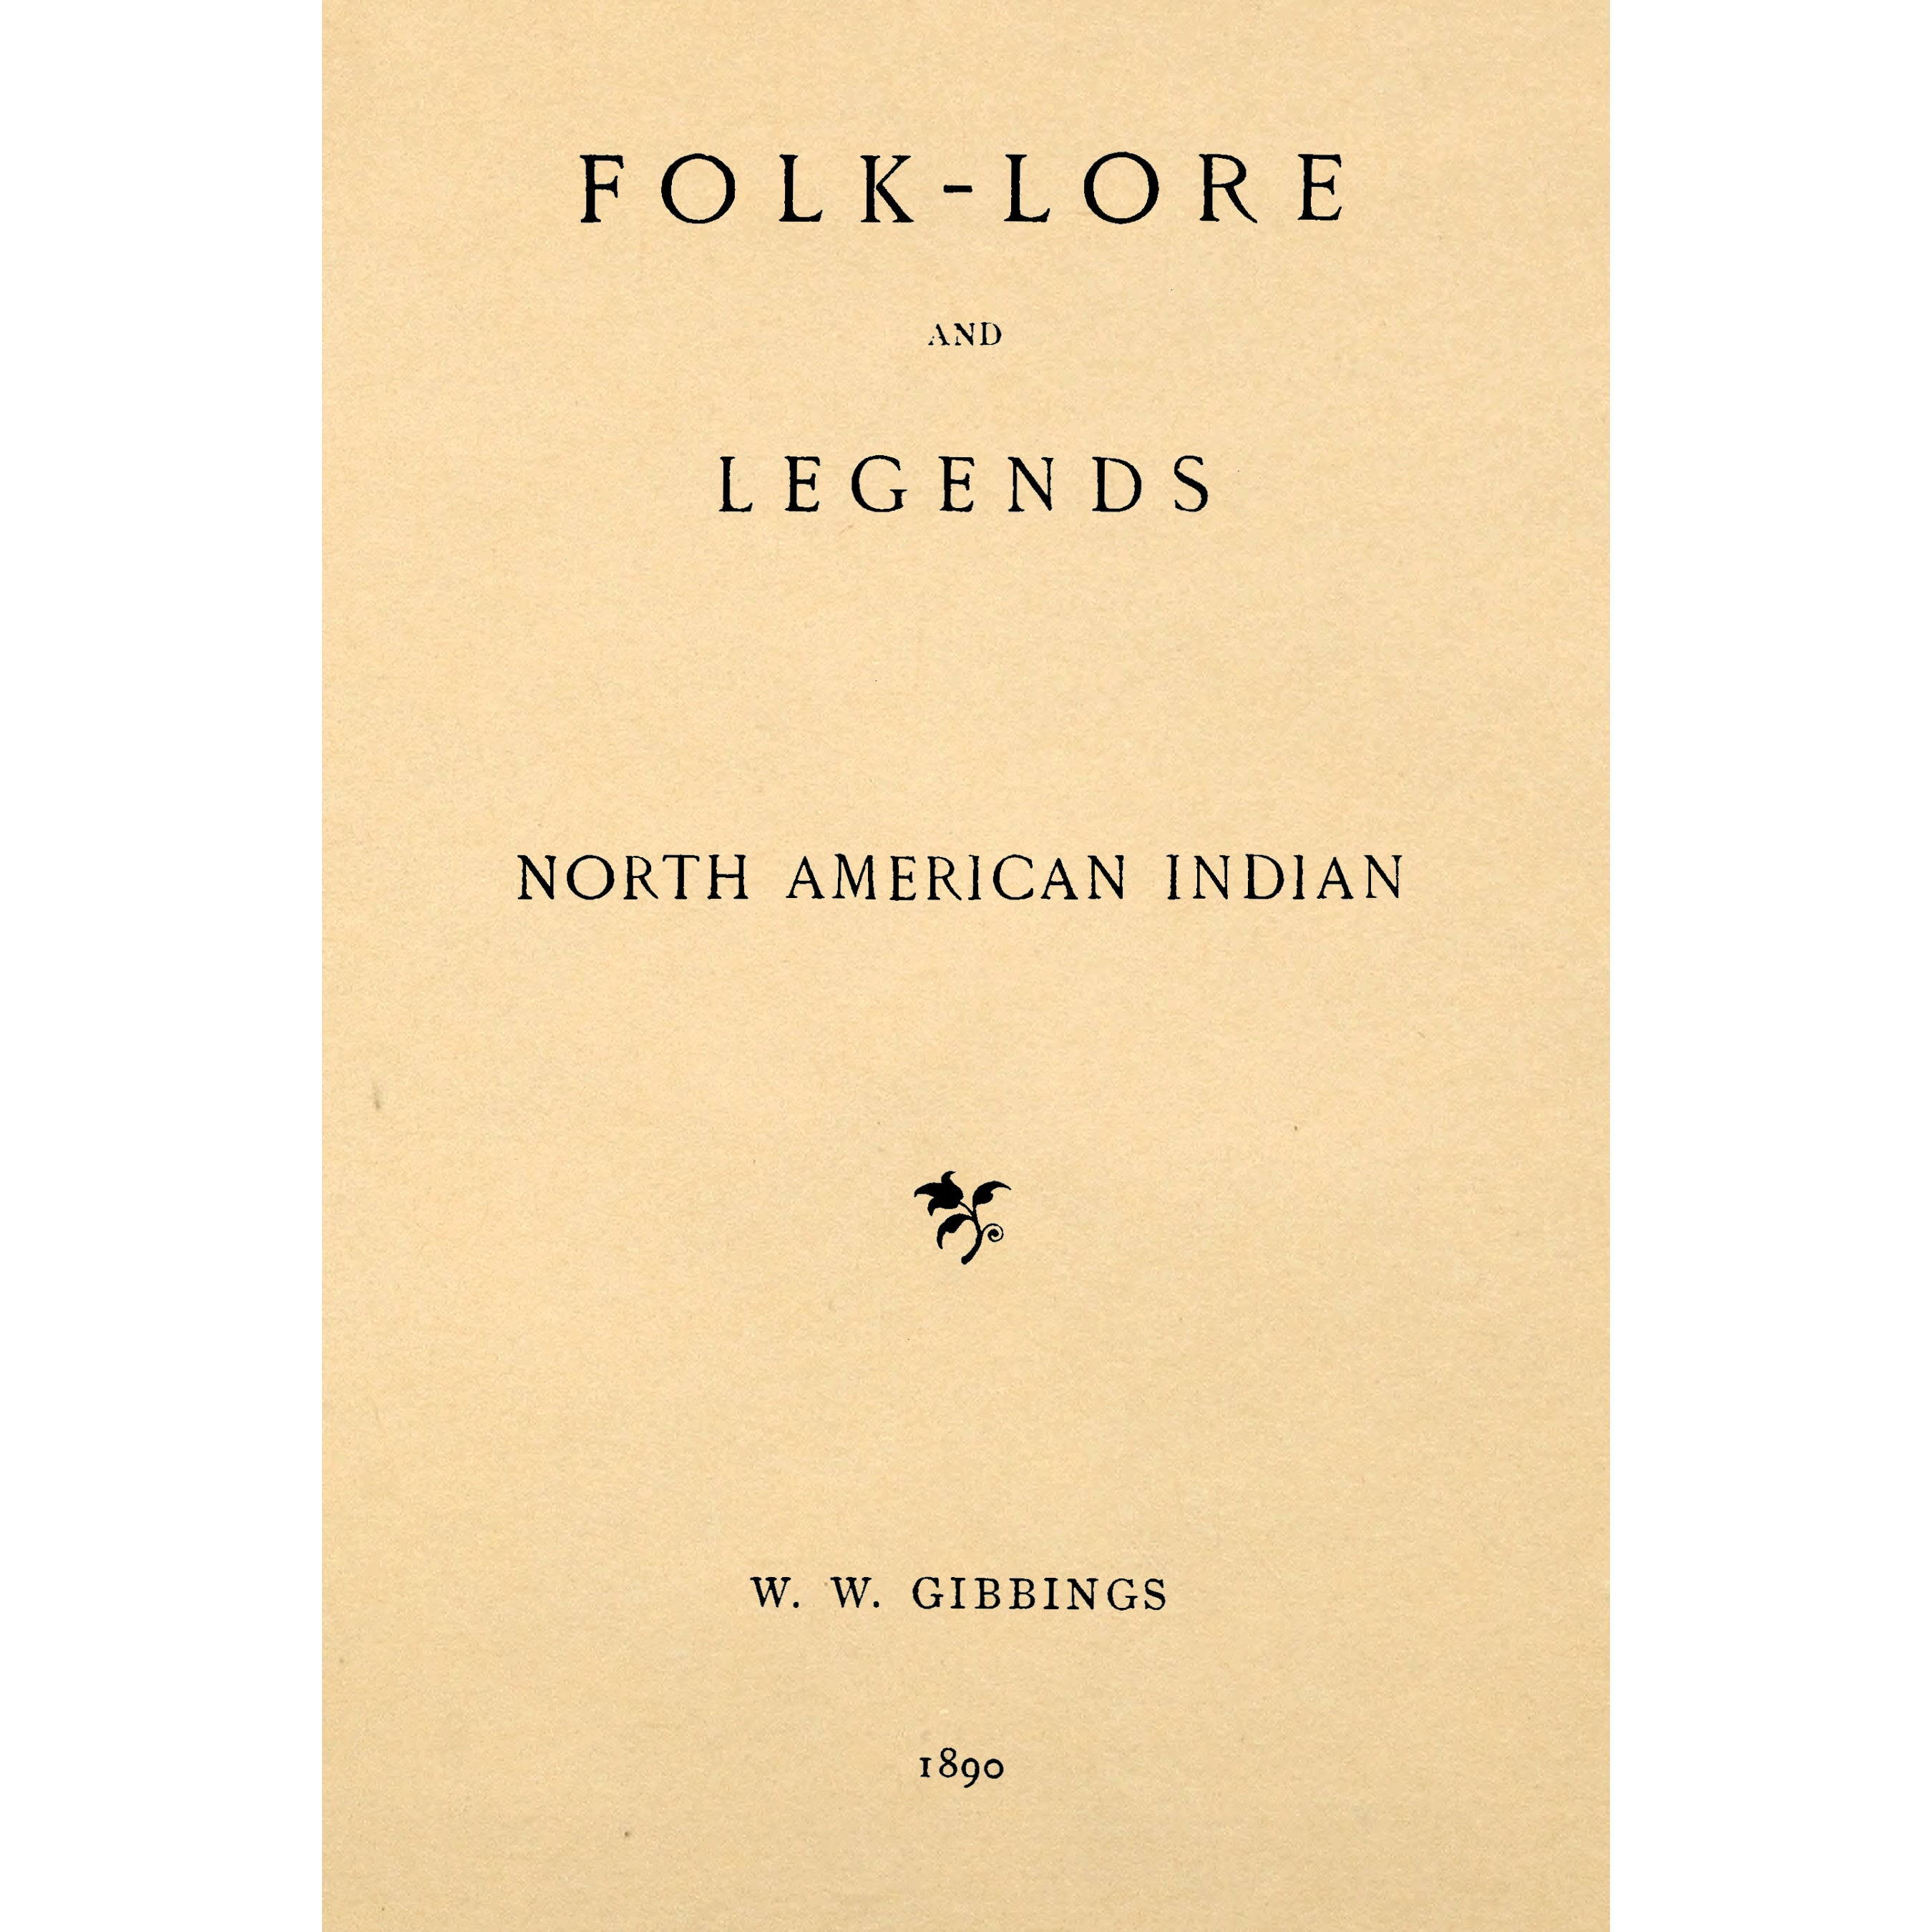 Folk-lore and legends Vol. 8 North American Indian